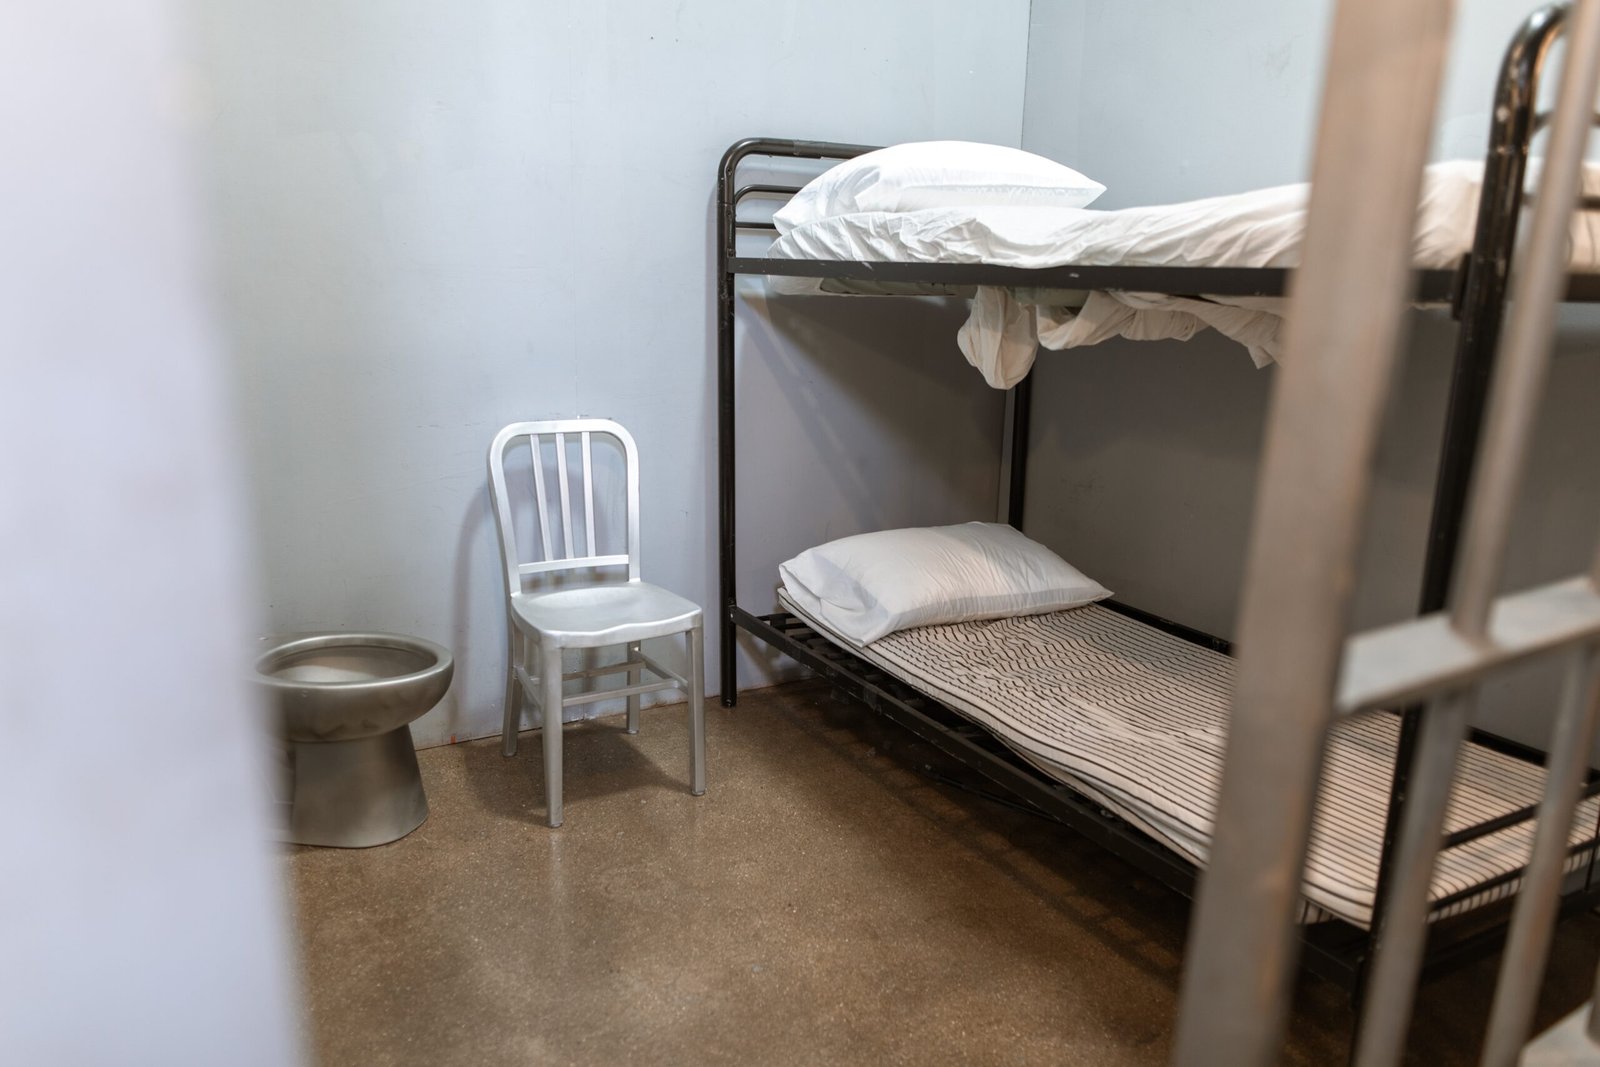 A photograph of a prison cell